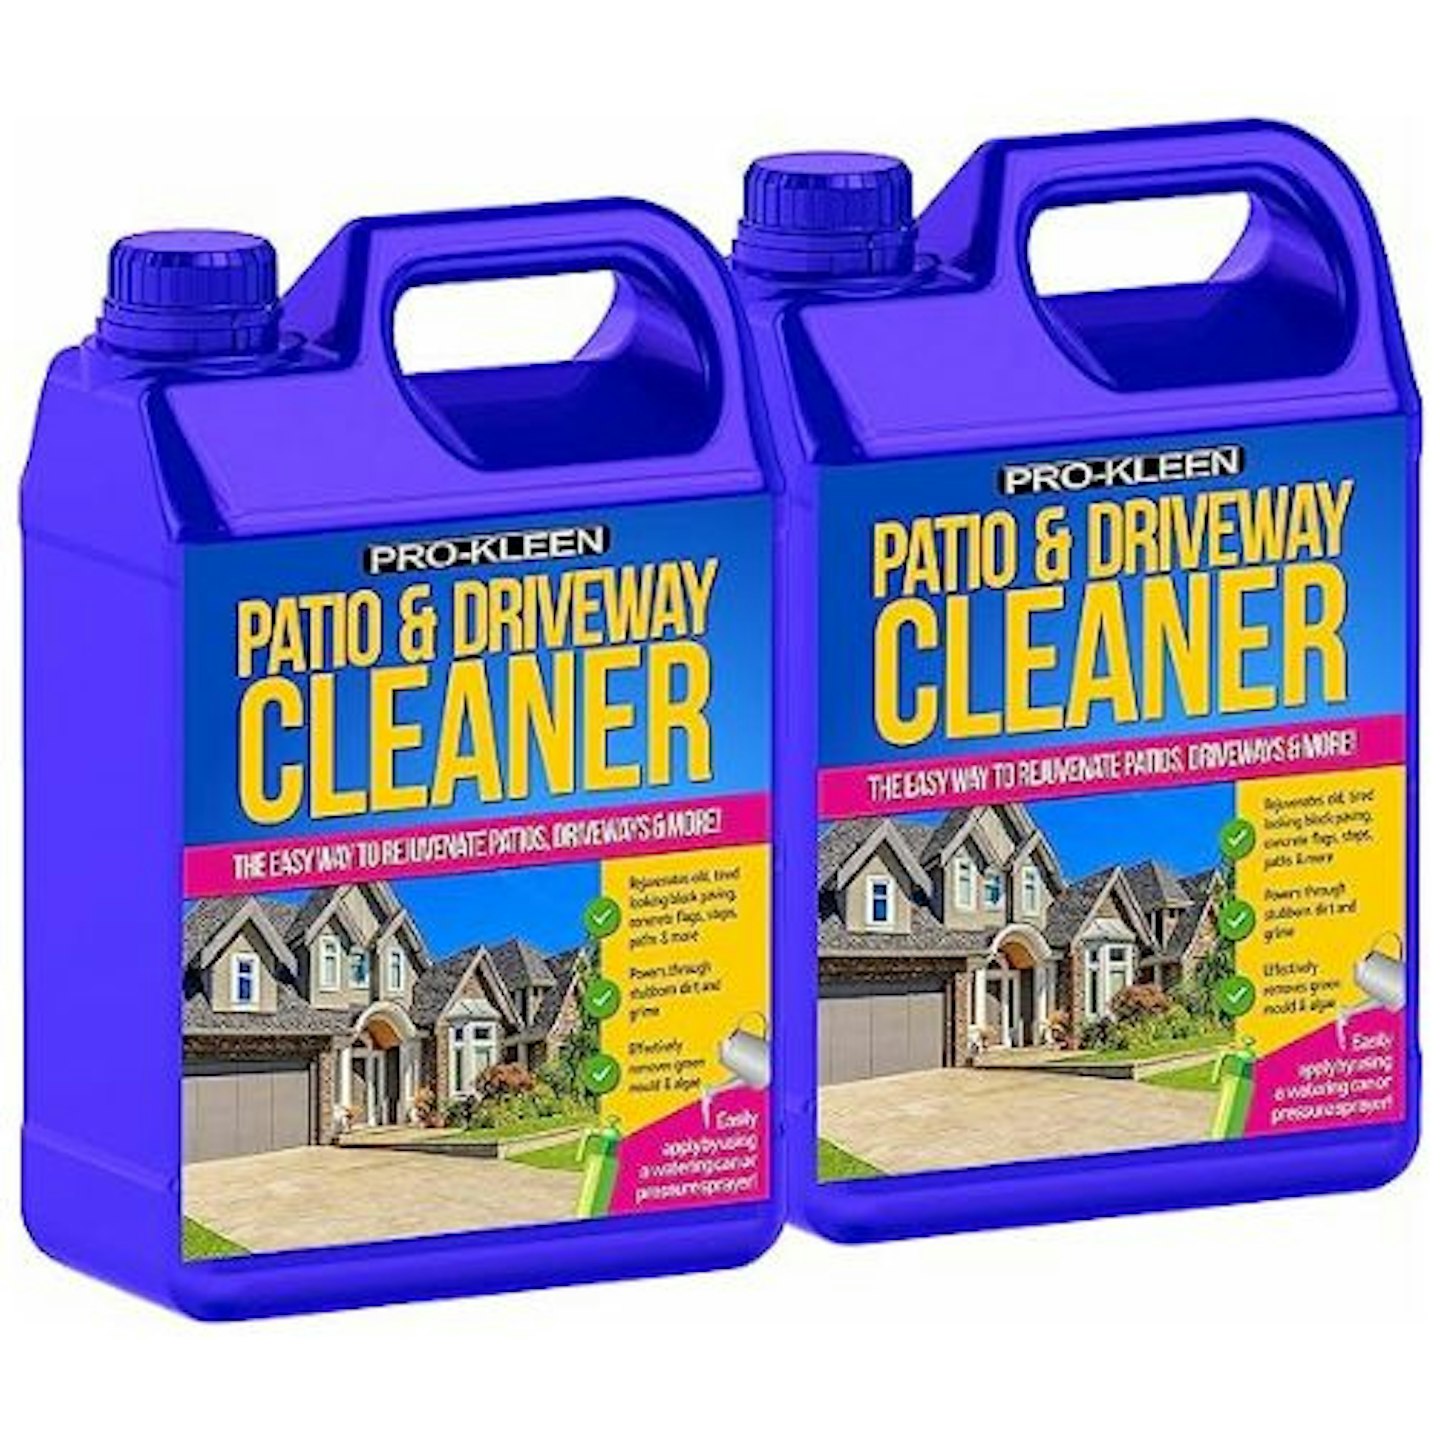 Pro-Kleen Patio and Driveway Cleaner